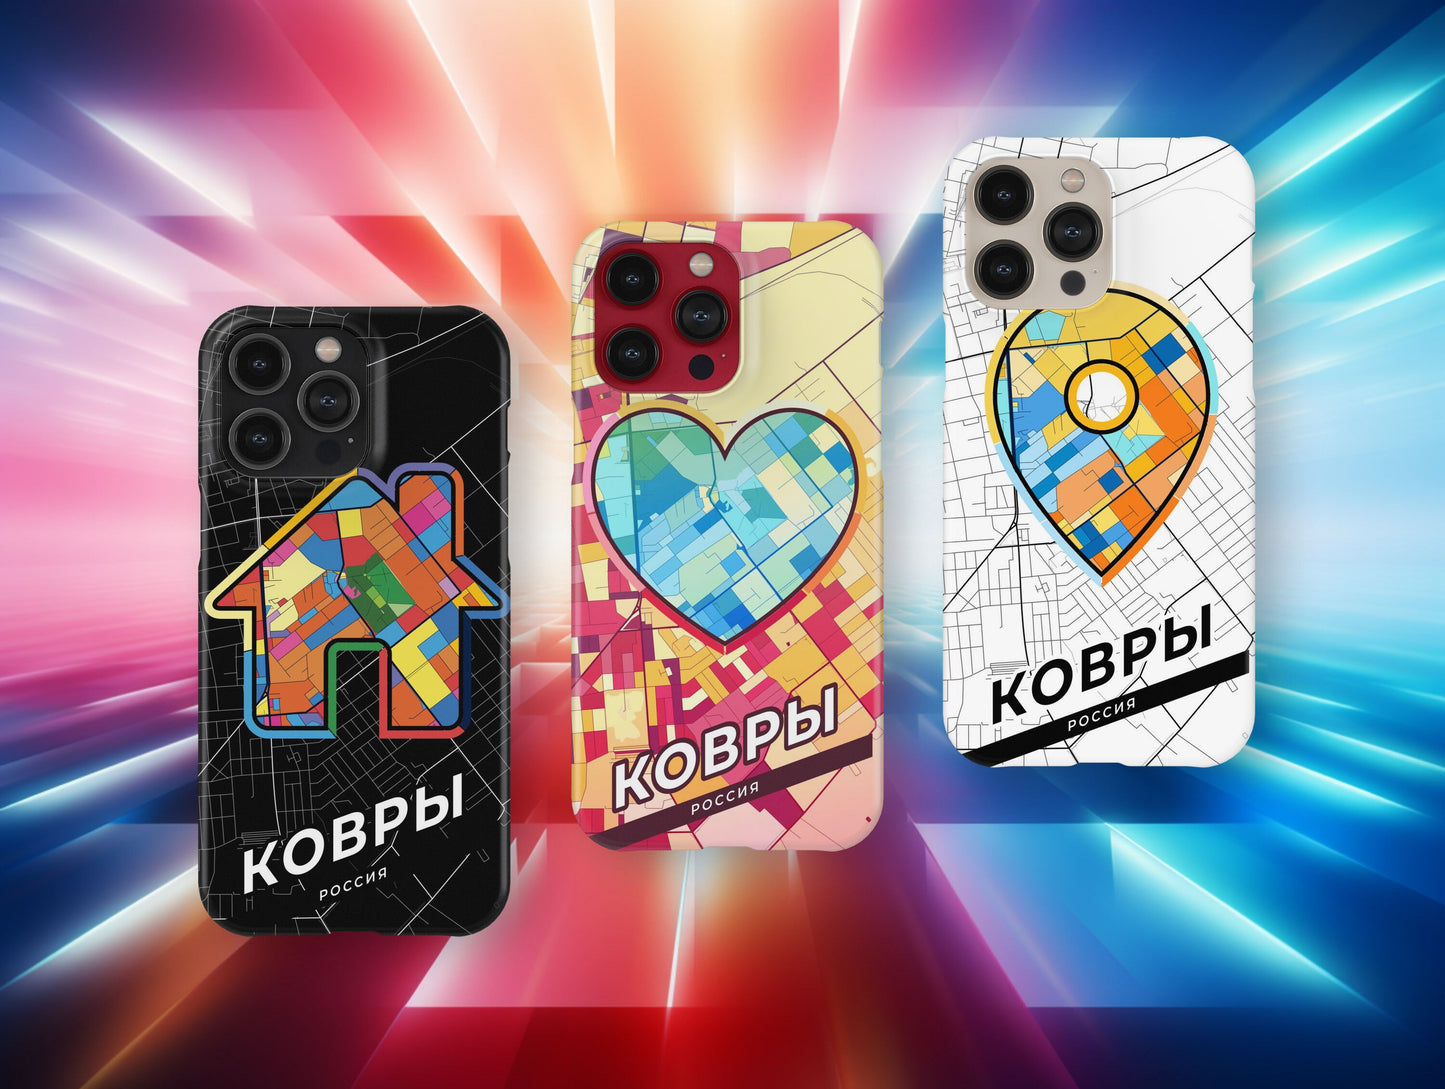 Kovrov Russia slim phone case with colorful icon. Birthday, wedding or housewarming gift. Couple match cases.